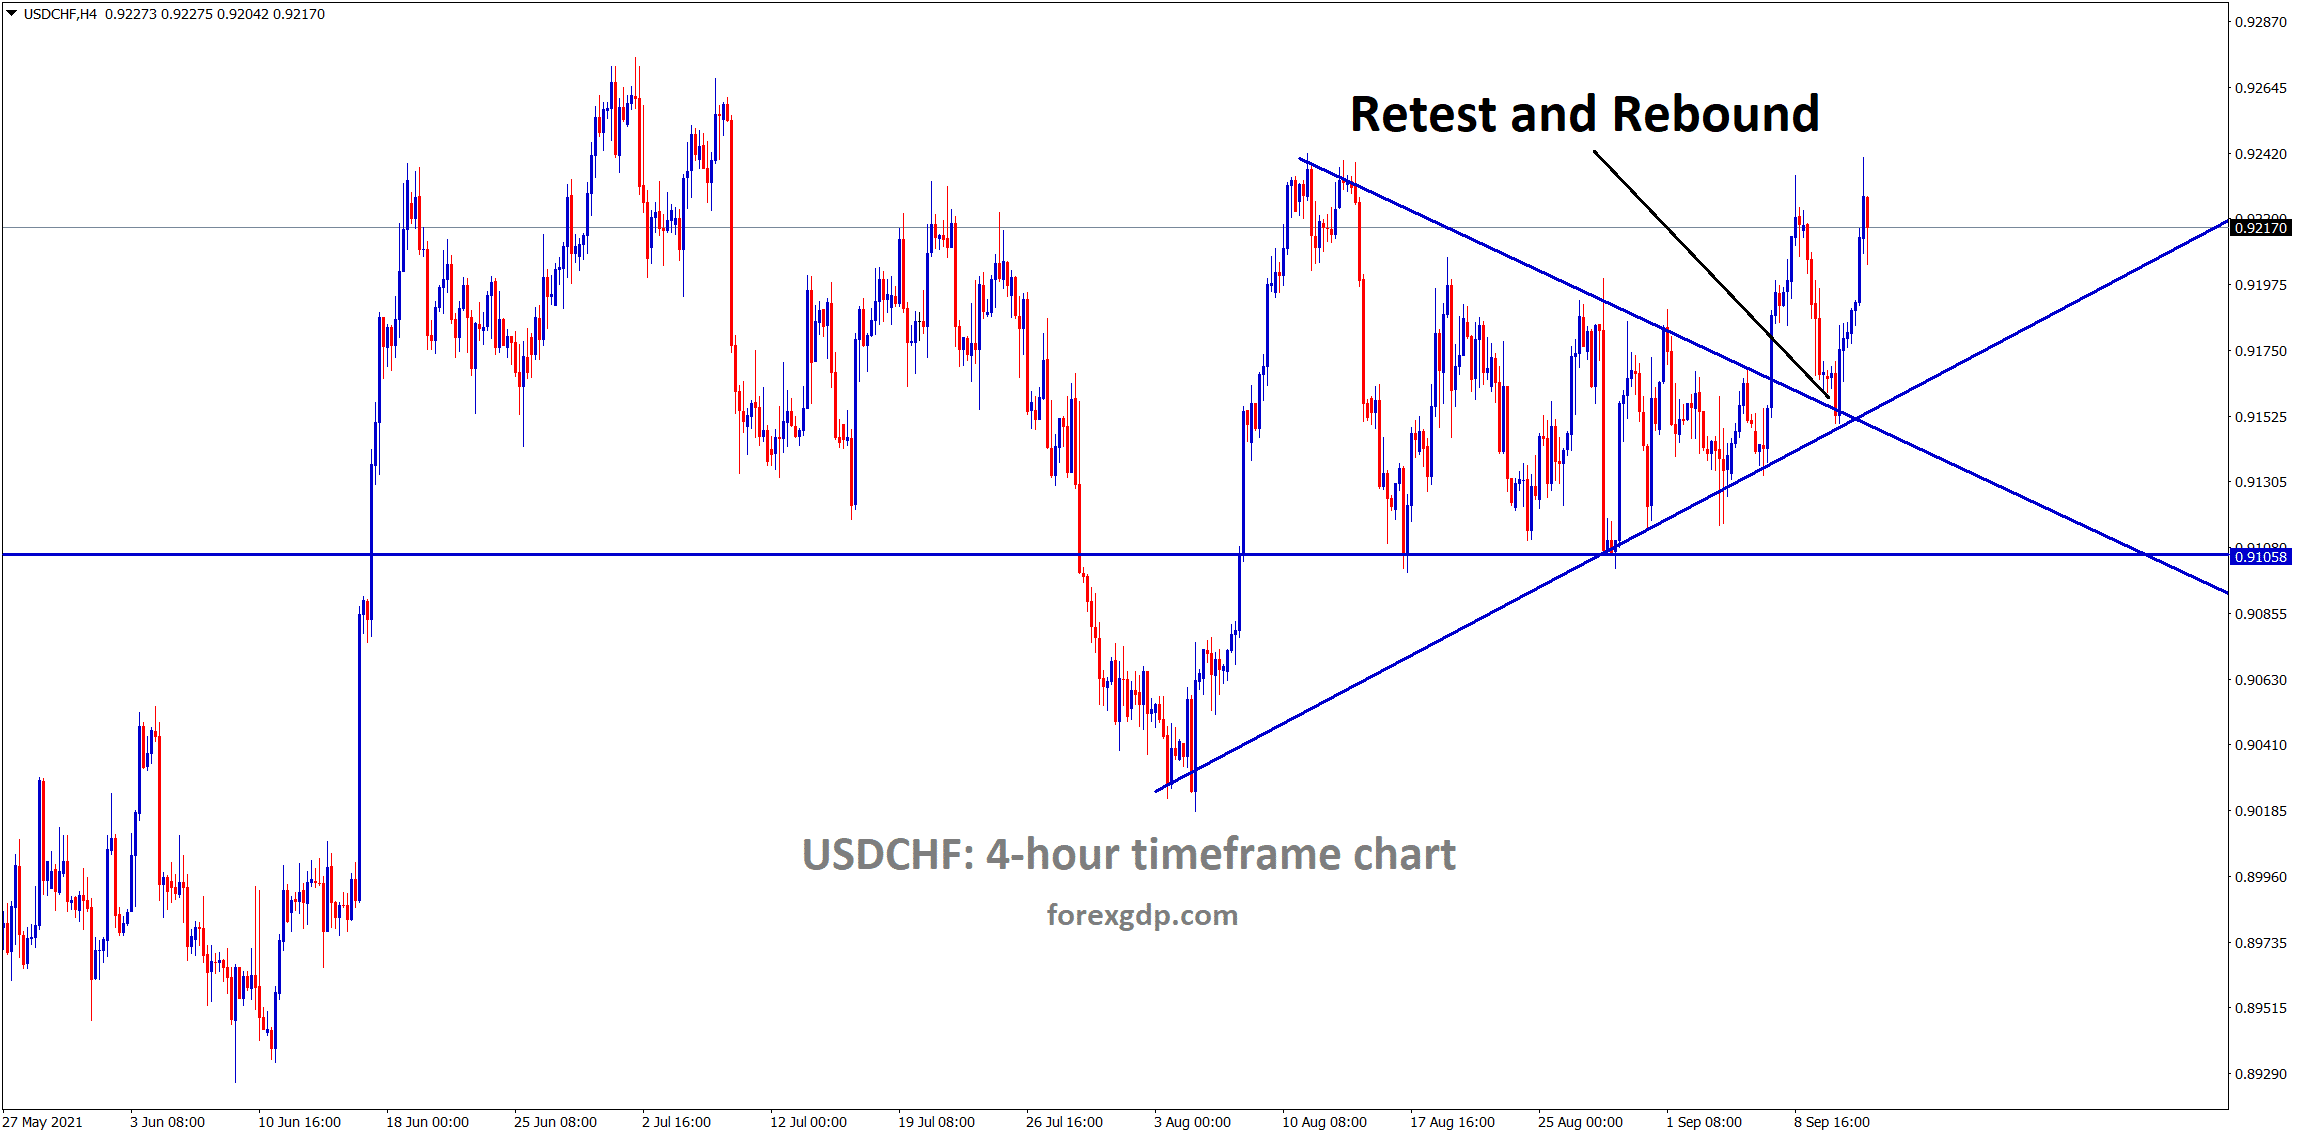 USDCHF has retested and rebounded from the broken triangle pattern